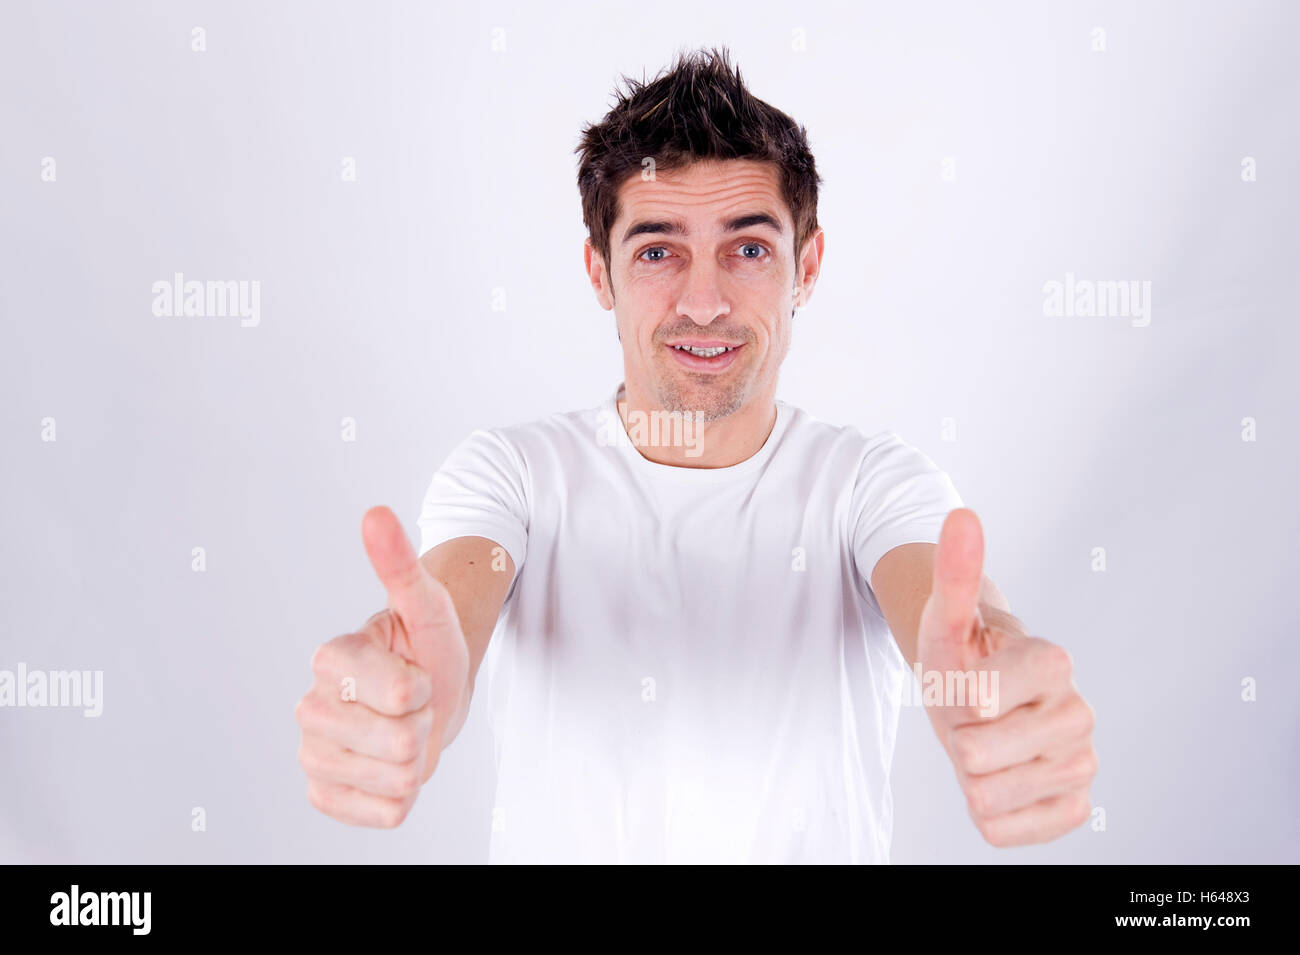 Man with thumbs up Stock Photo